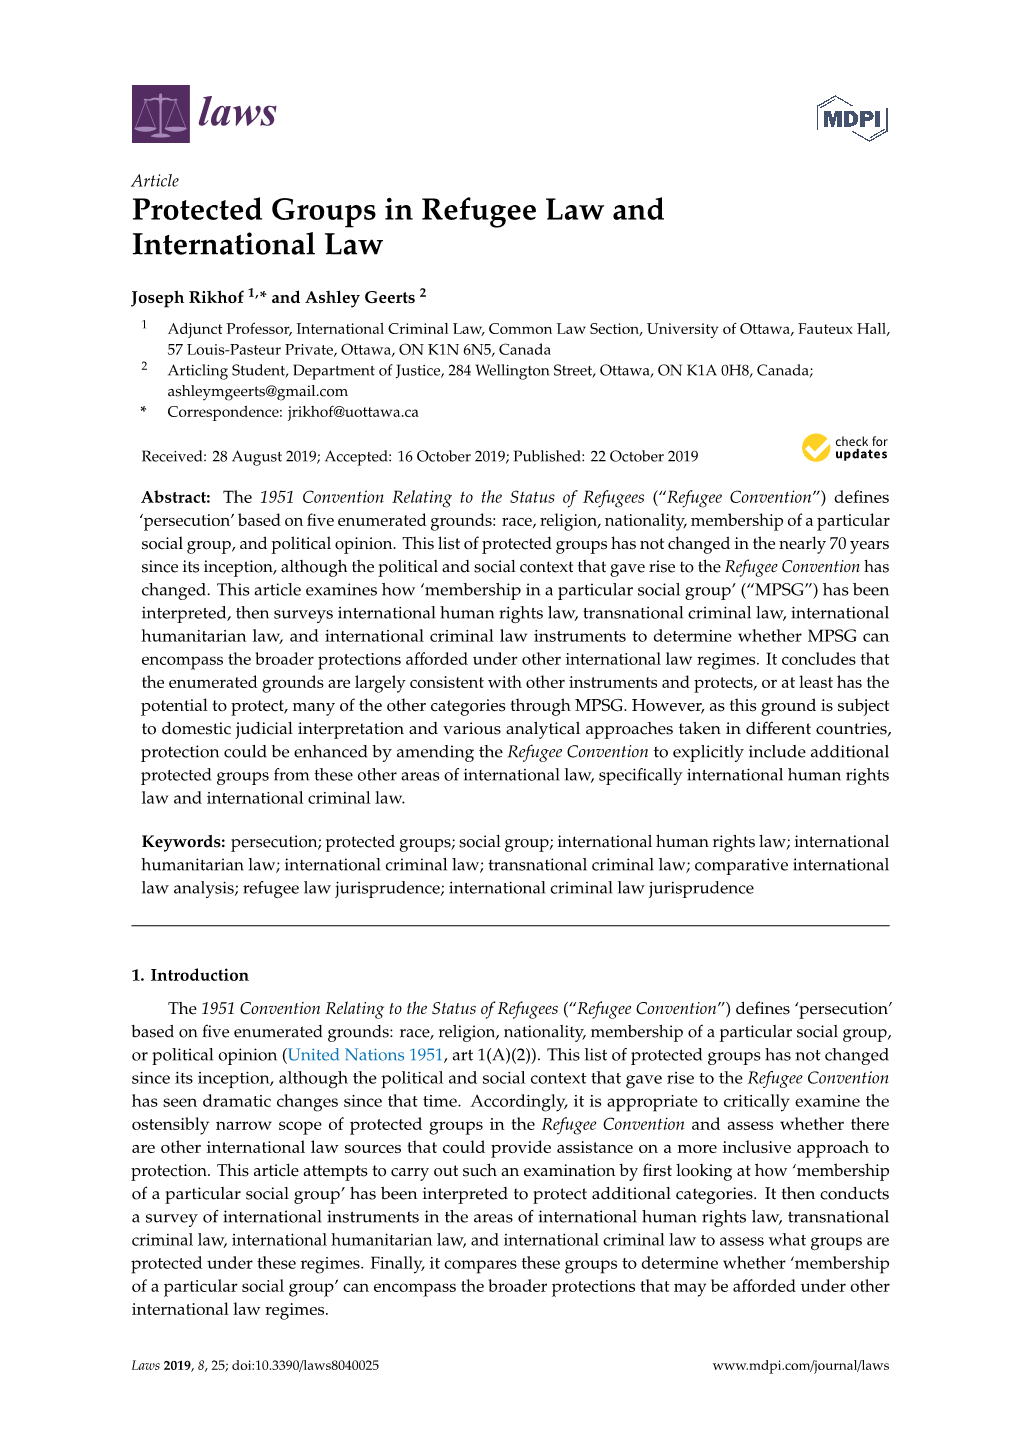 Protected Groups in Refugee Law and International Law